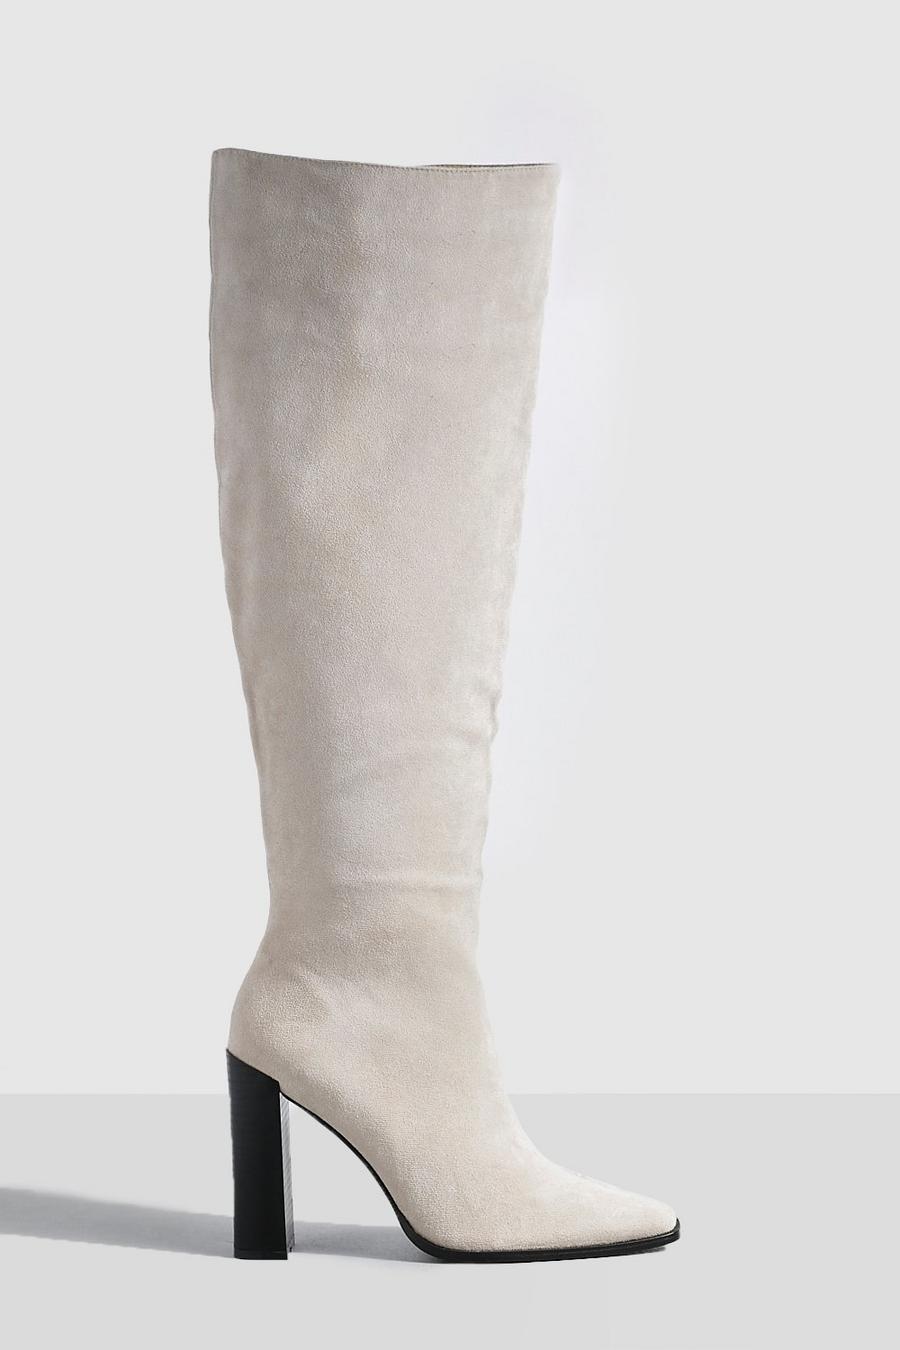 Stone Stack Heel Square Toe Knee High Boots image number 1